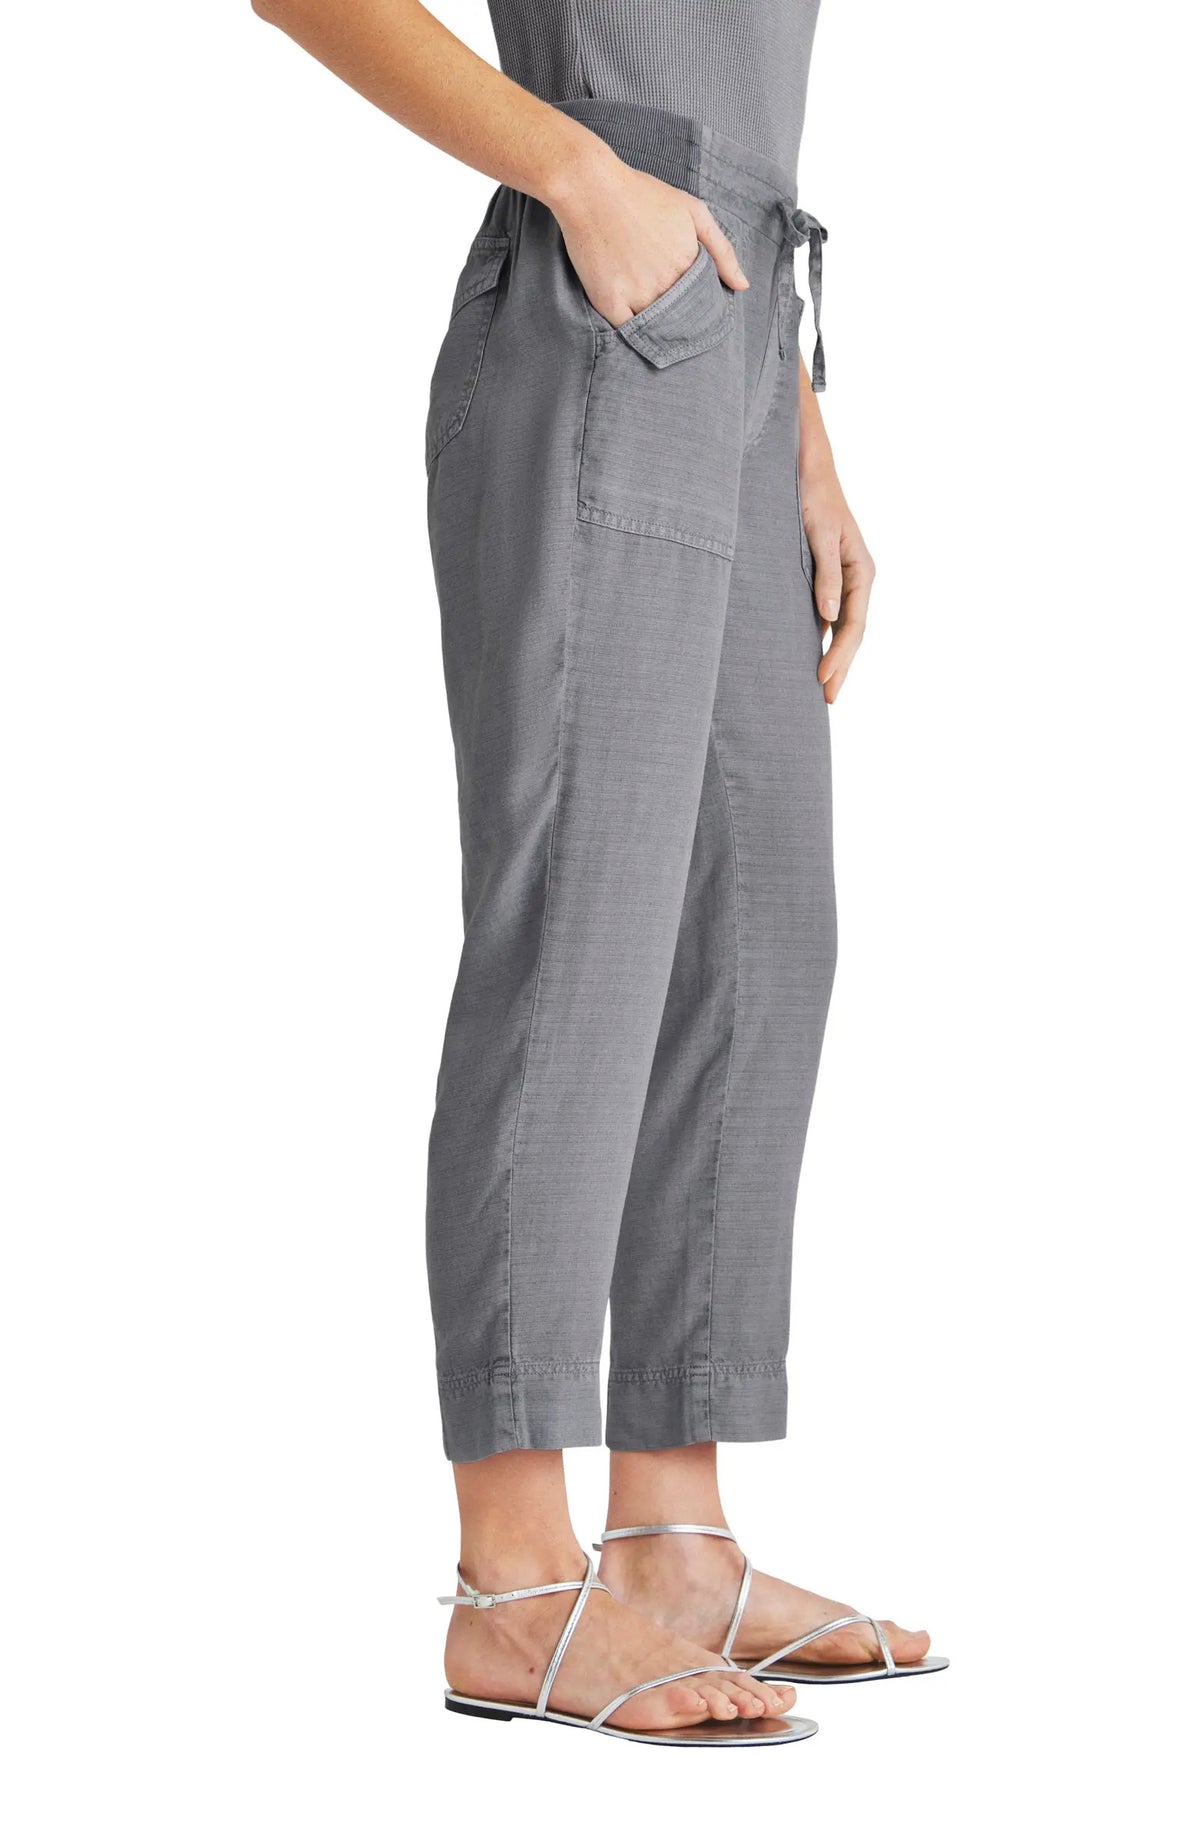 Splendid Collins Pant in Grey Mist - Size S Available